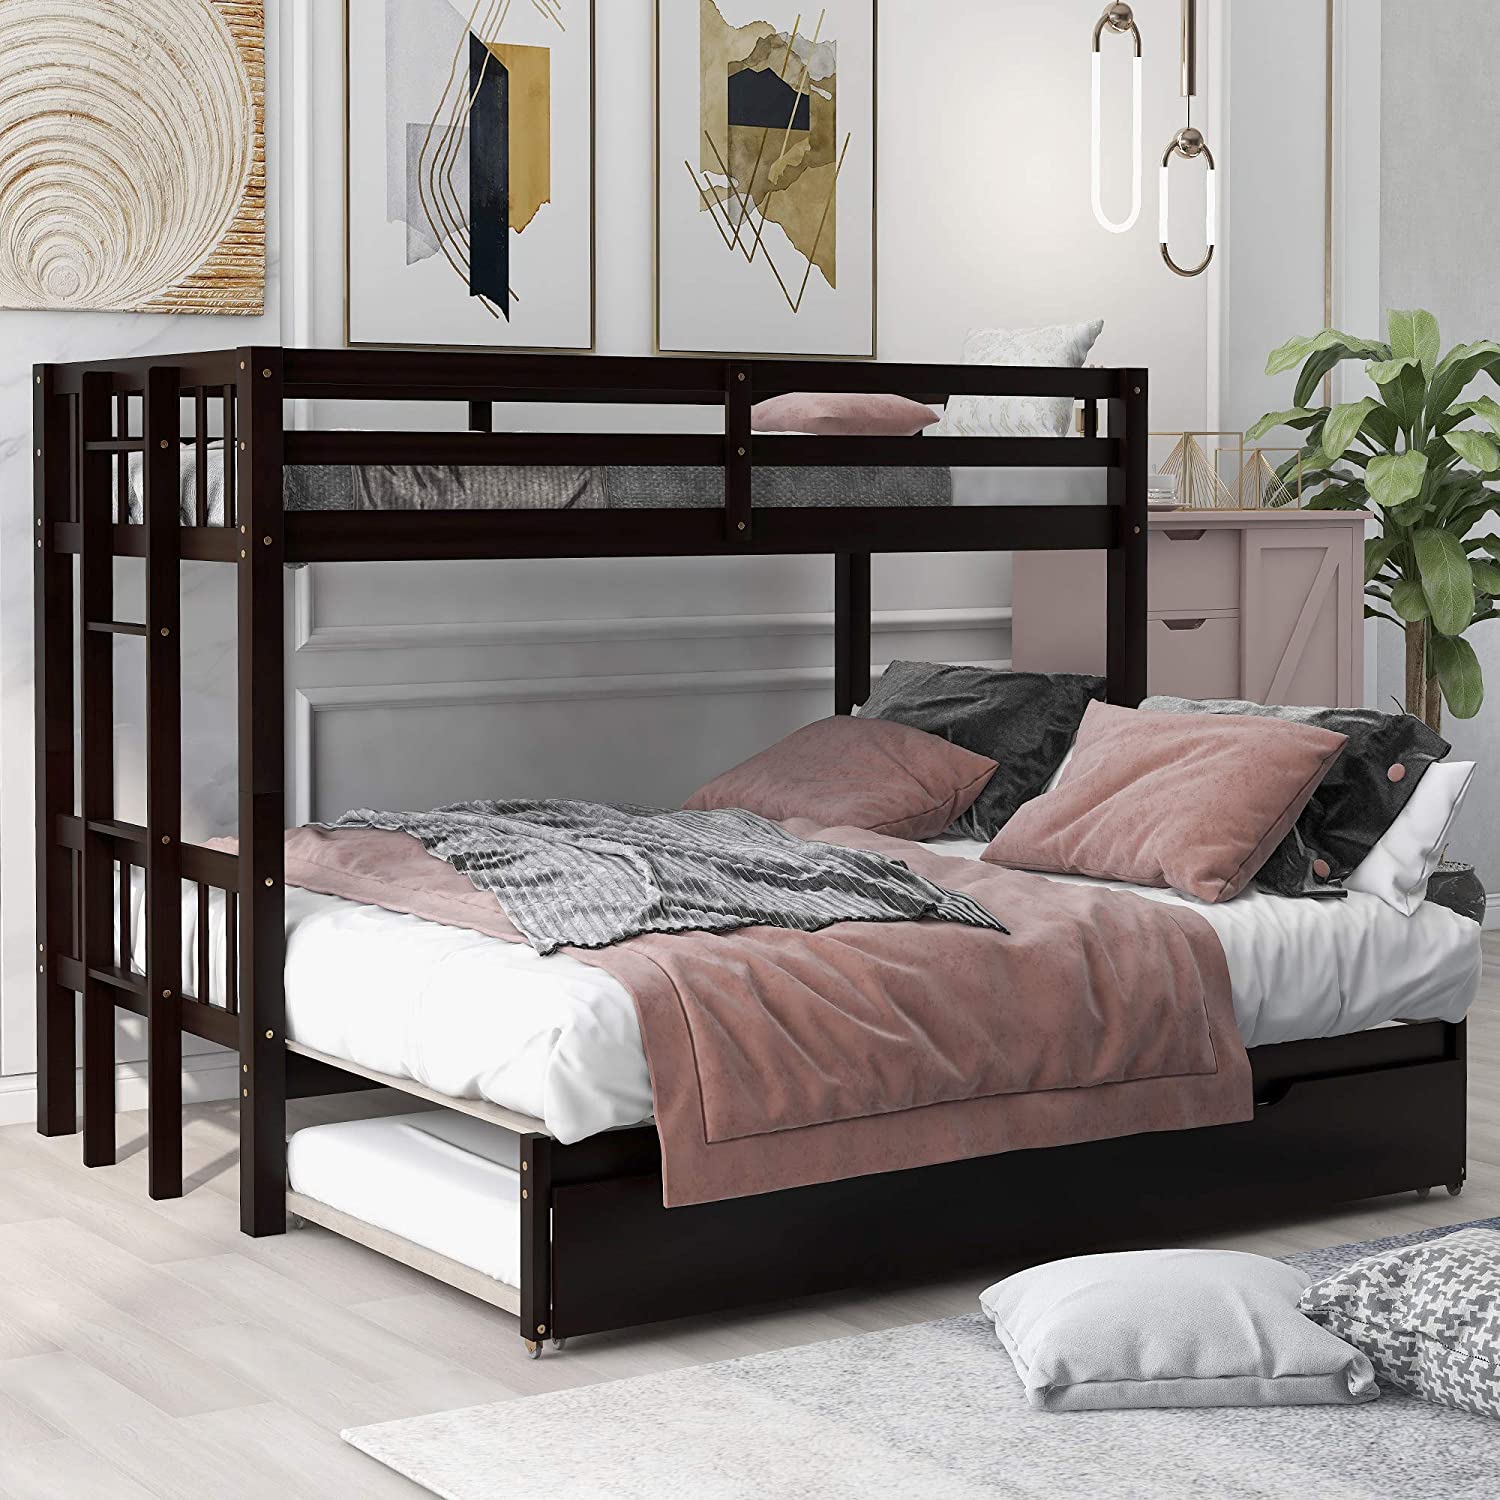 Buy Pull Out Bed Online For Your Toddler